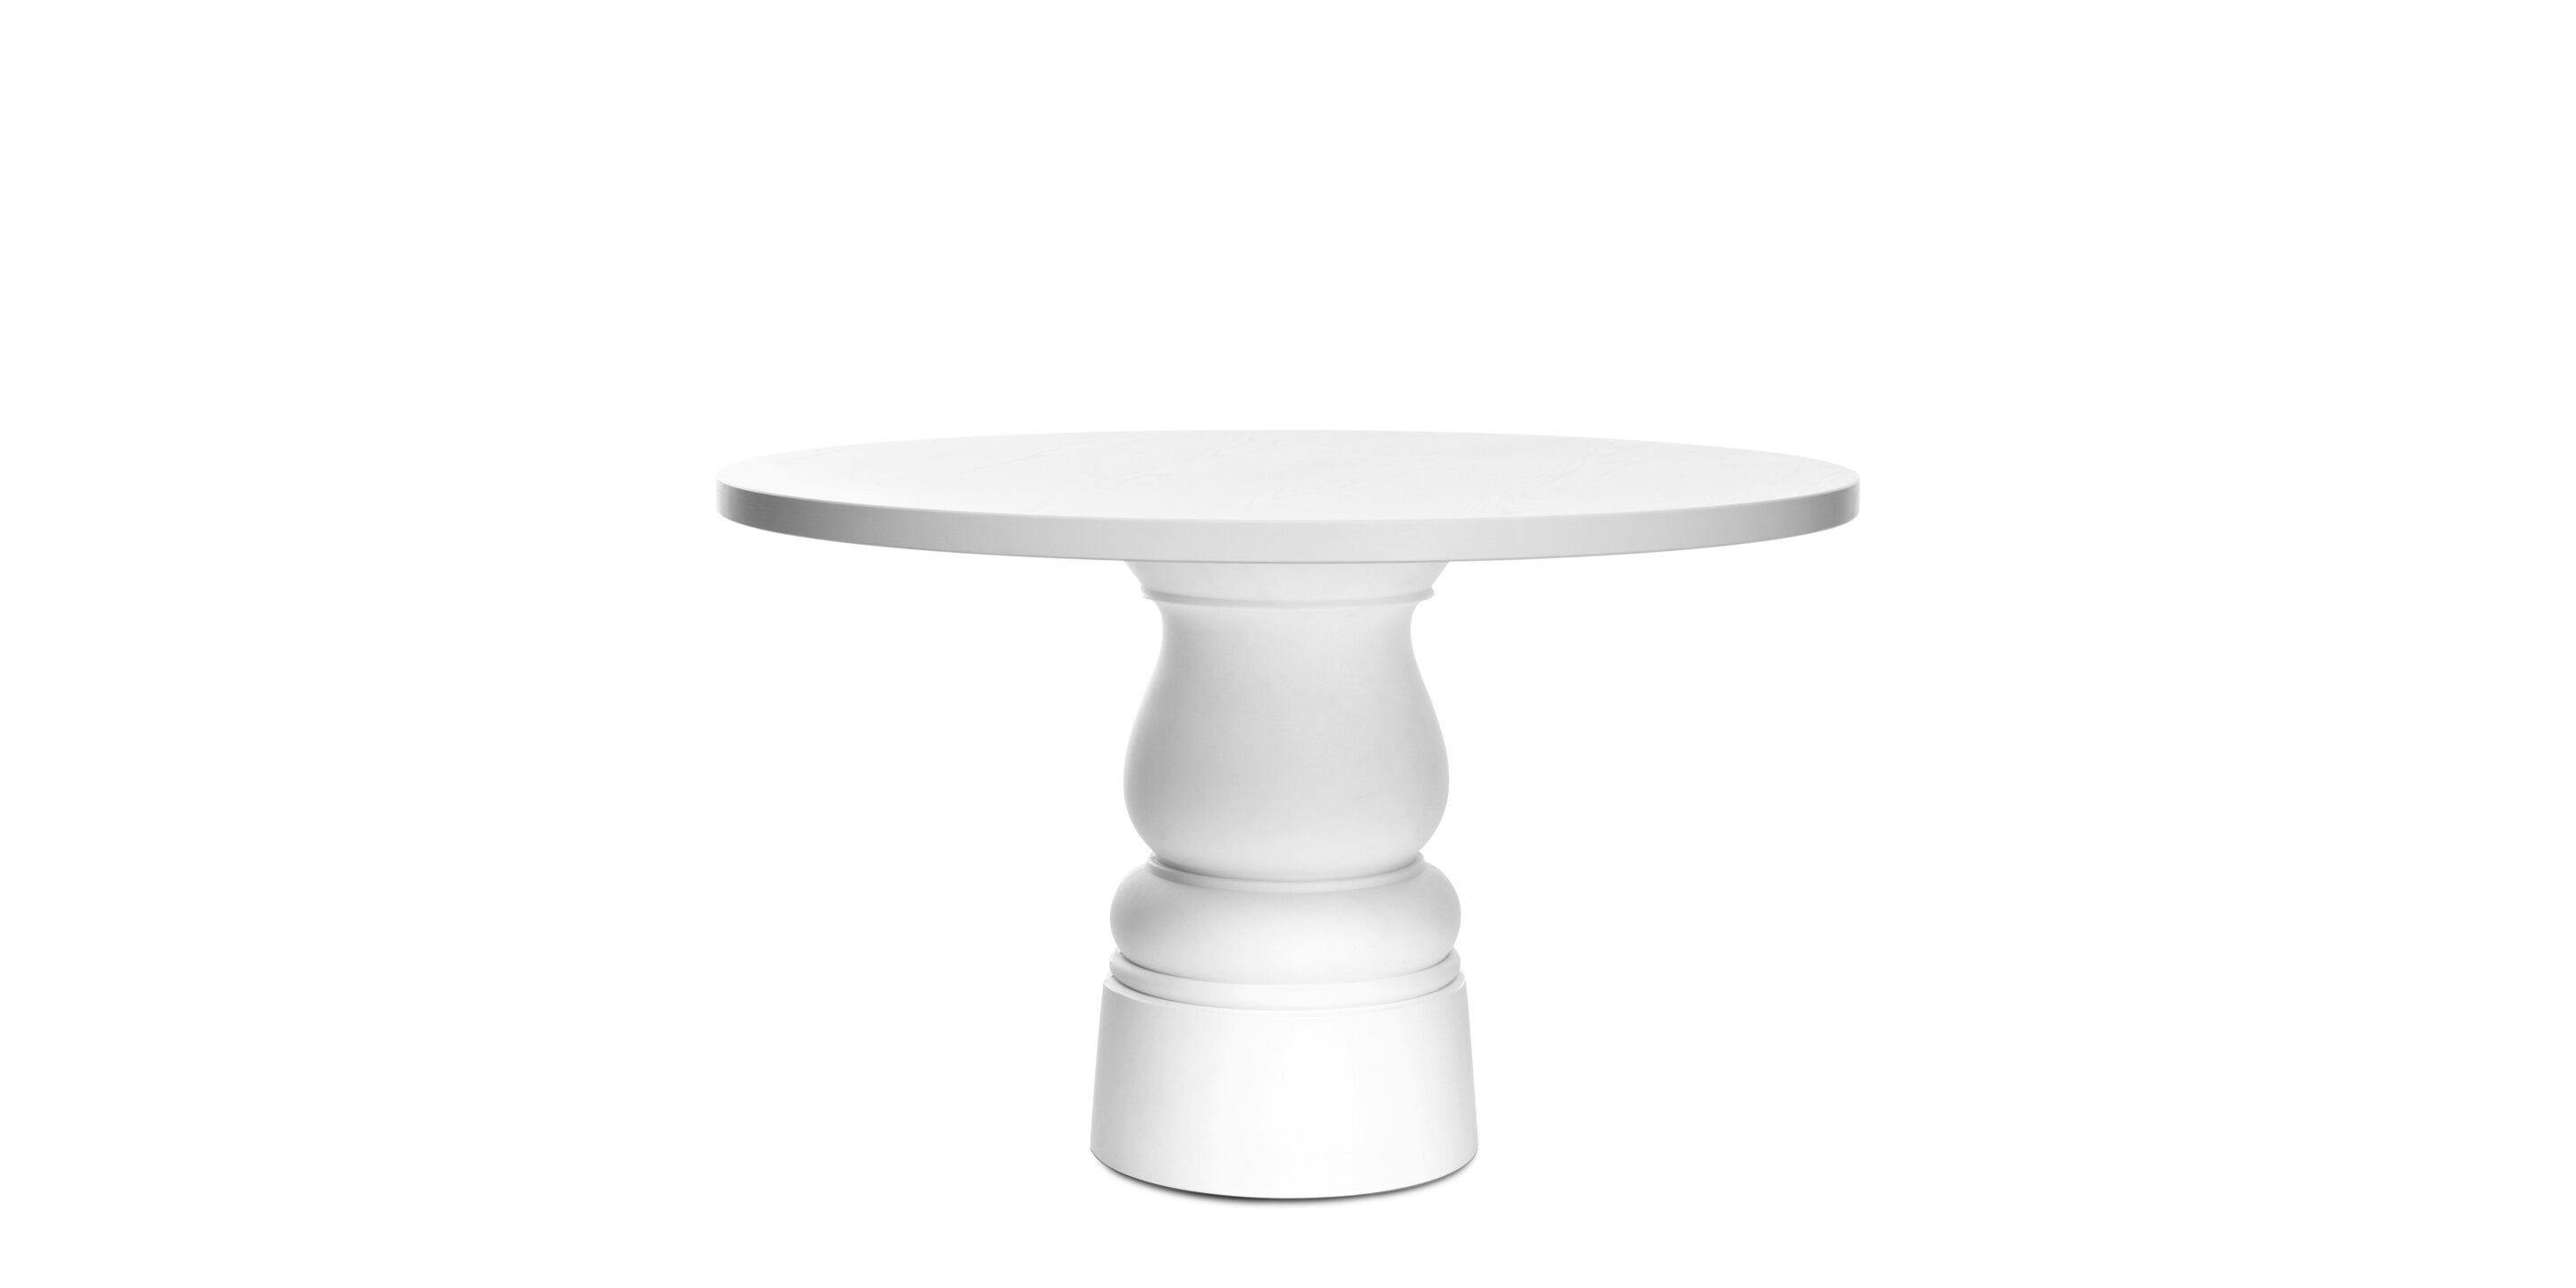 Container Table New Antiques round white